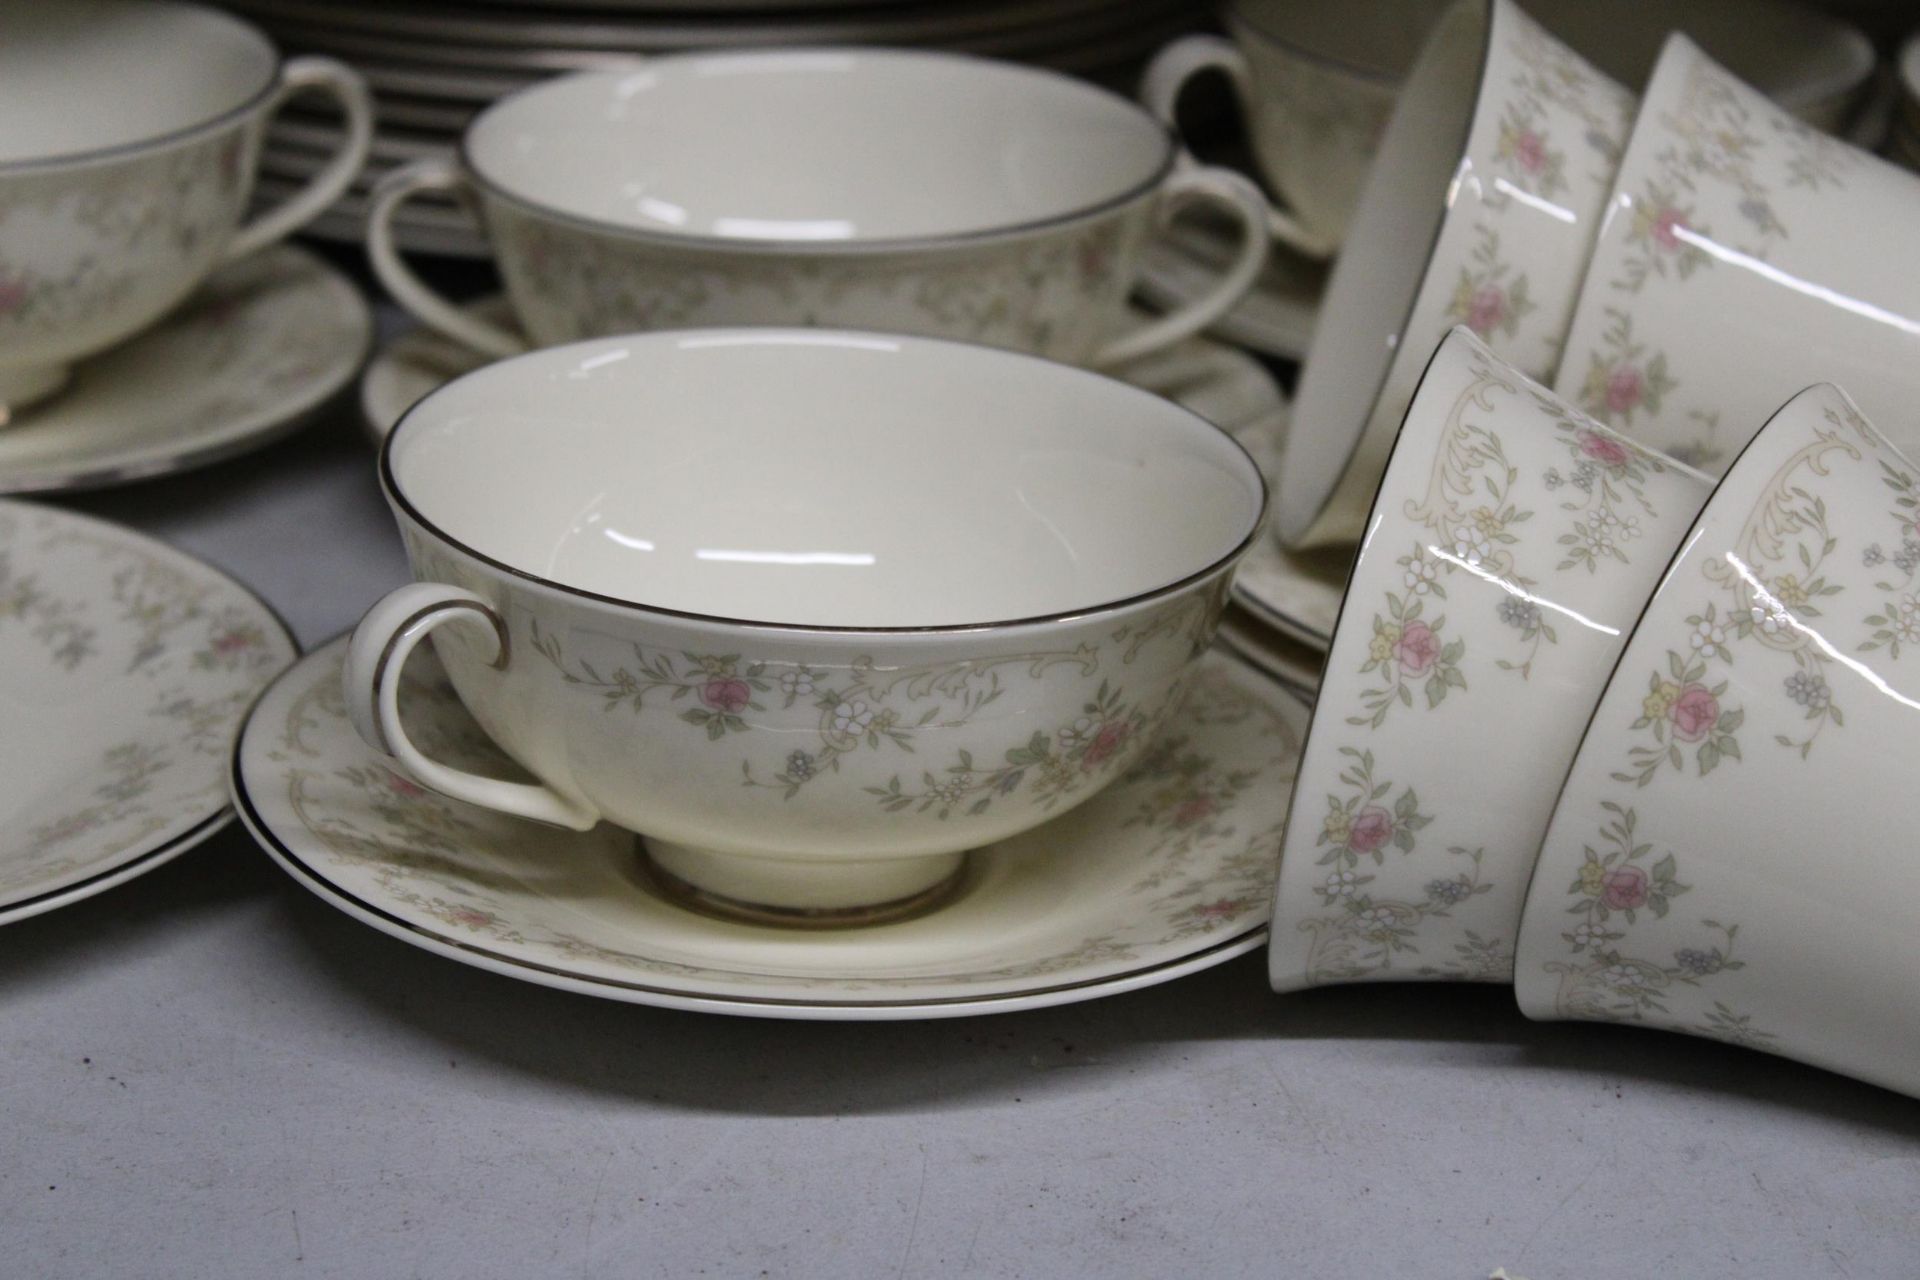 A ROYAL DOULTON 'DIANA' DINNER SERVICE TO INCLUDE SERVING TUREENS, VARIOUS SIZES OF PLATES, SOUP - Image 4 of 6